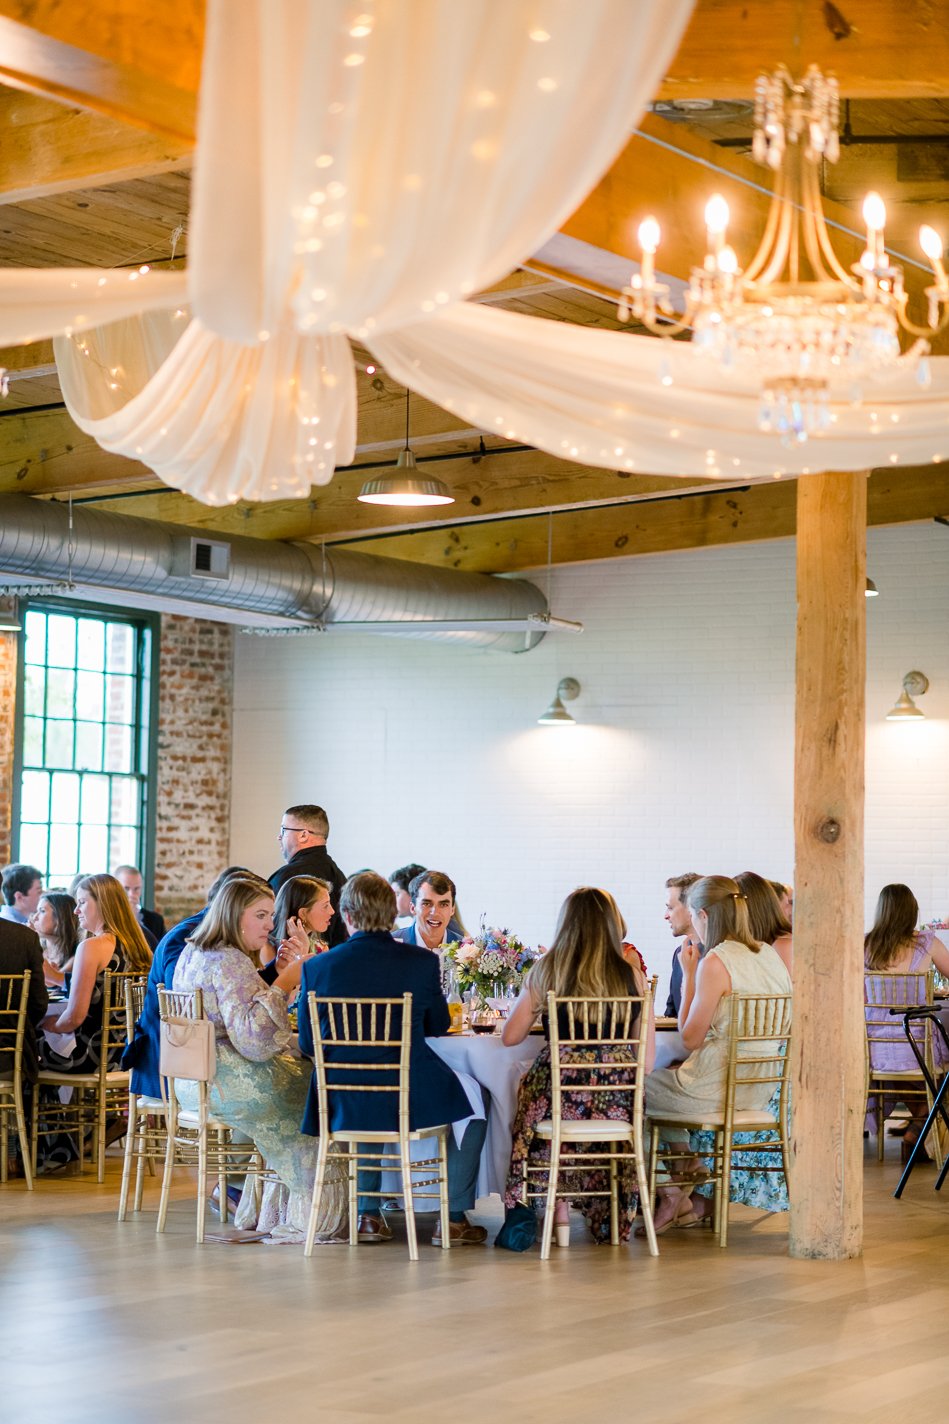 WoolenMill_TheSIlkMill_FredericksburgWeddingVenue_DowntownFredericksburg_VirginiaWeddingVenue_Event_BridalShow2023_youseephotography_pic69.jpg